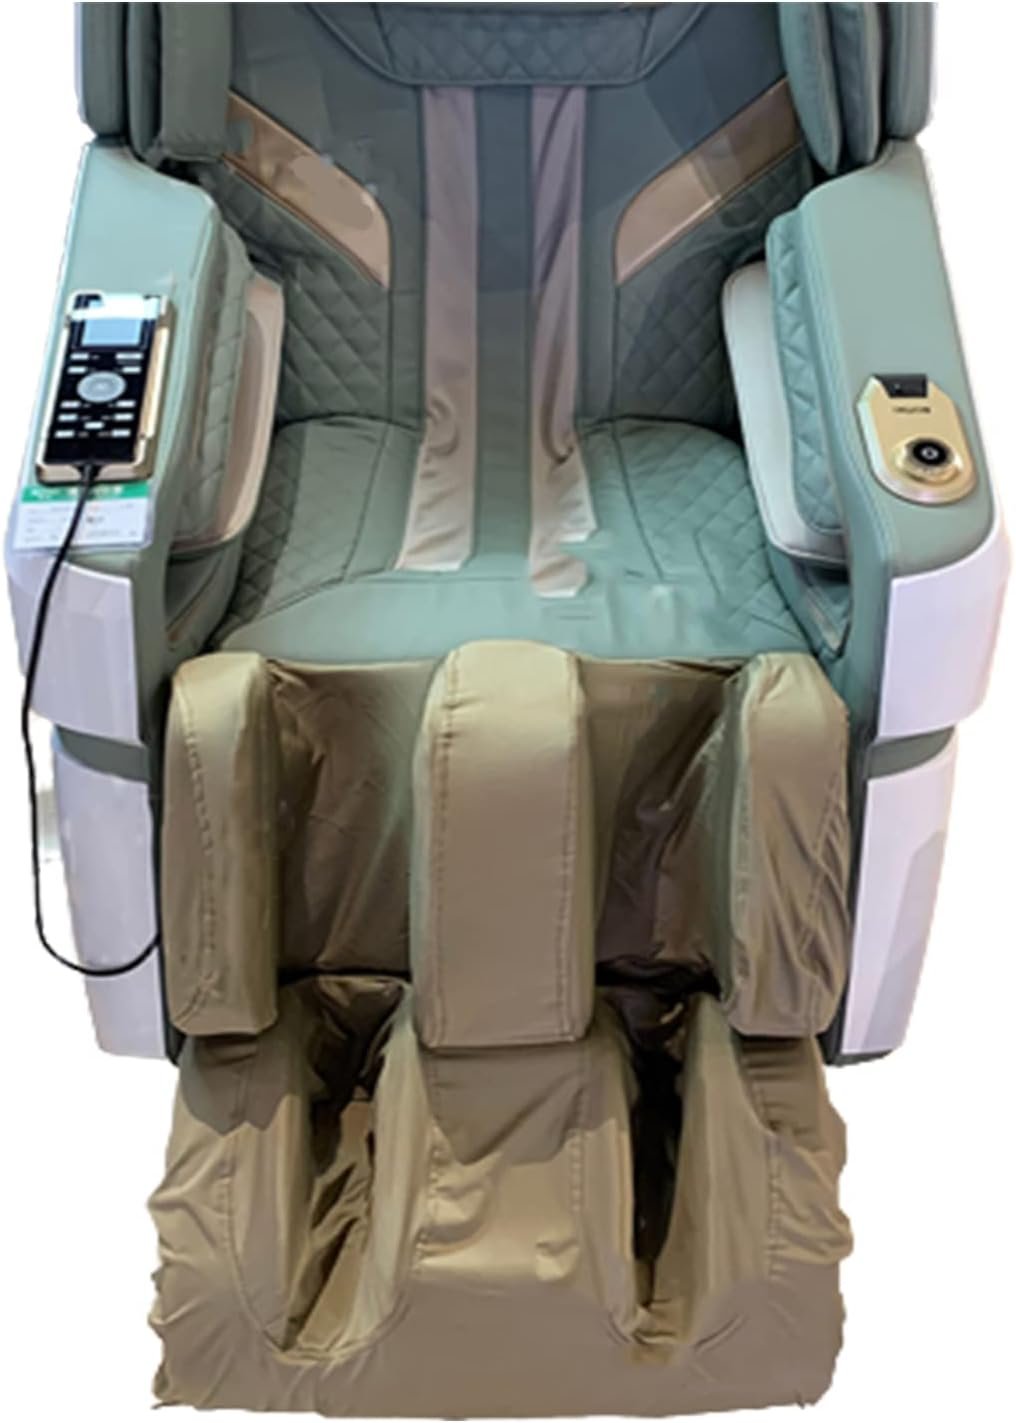 FBKPHSS Full Body Massage Chairs Recliner Cover, Zero Gravity Chair Cover Scratch Resistant Washed Stretch Cloth Furniture Dustproof Covers Fits Most Massage Chairs,Khaki,Full Body